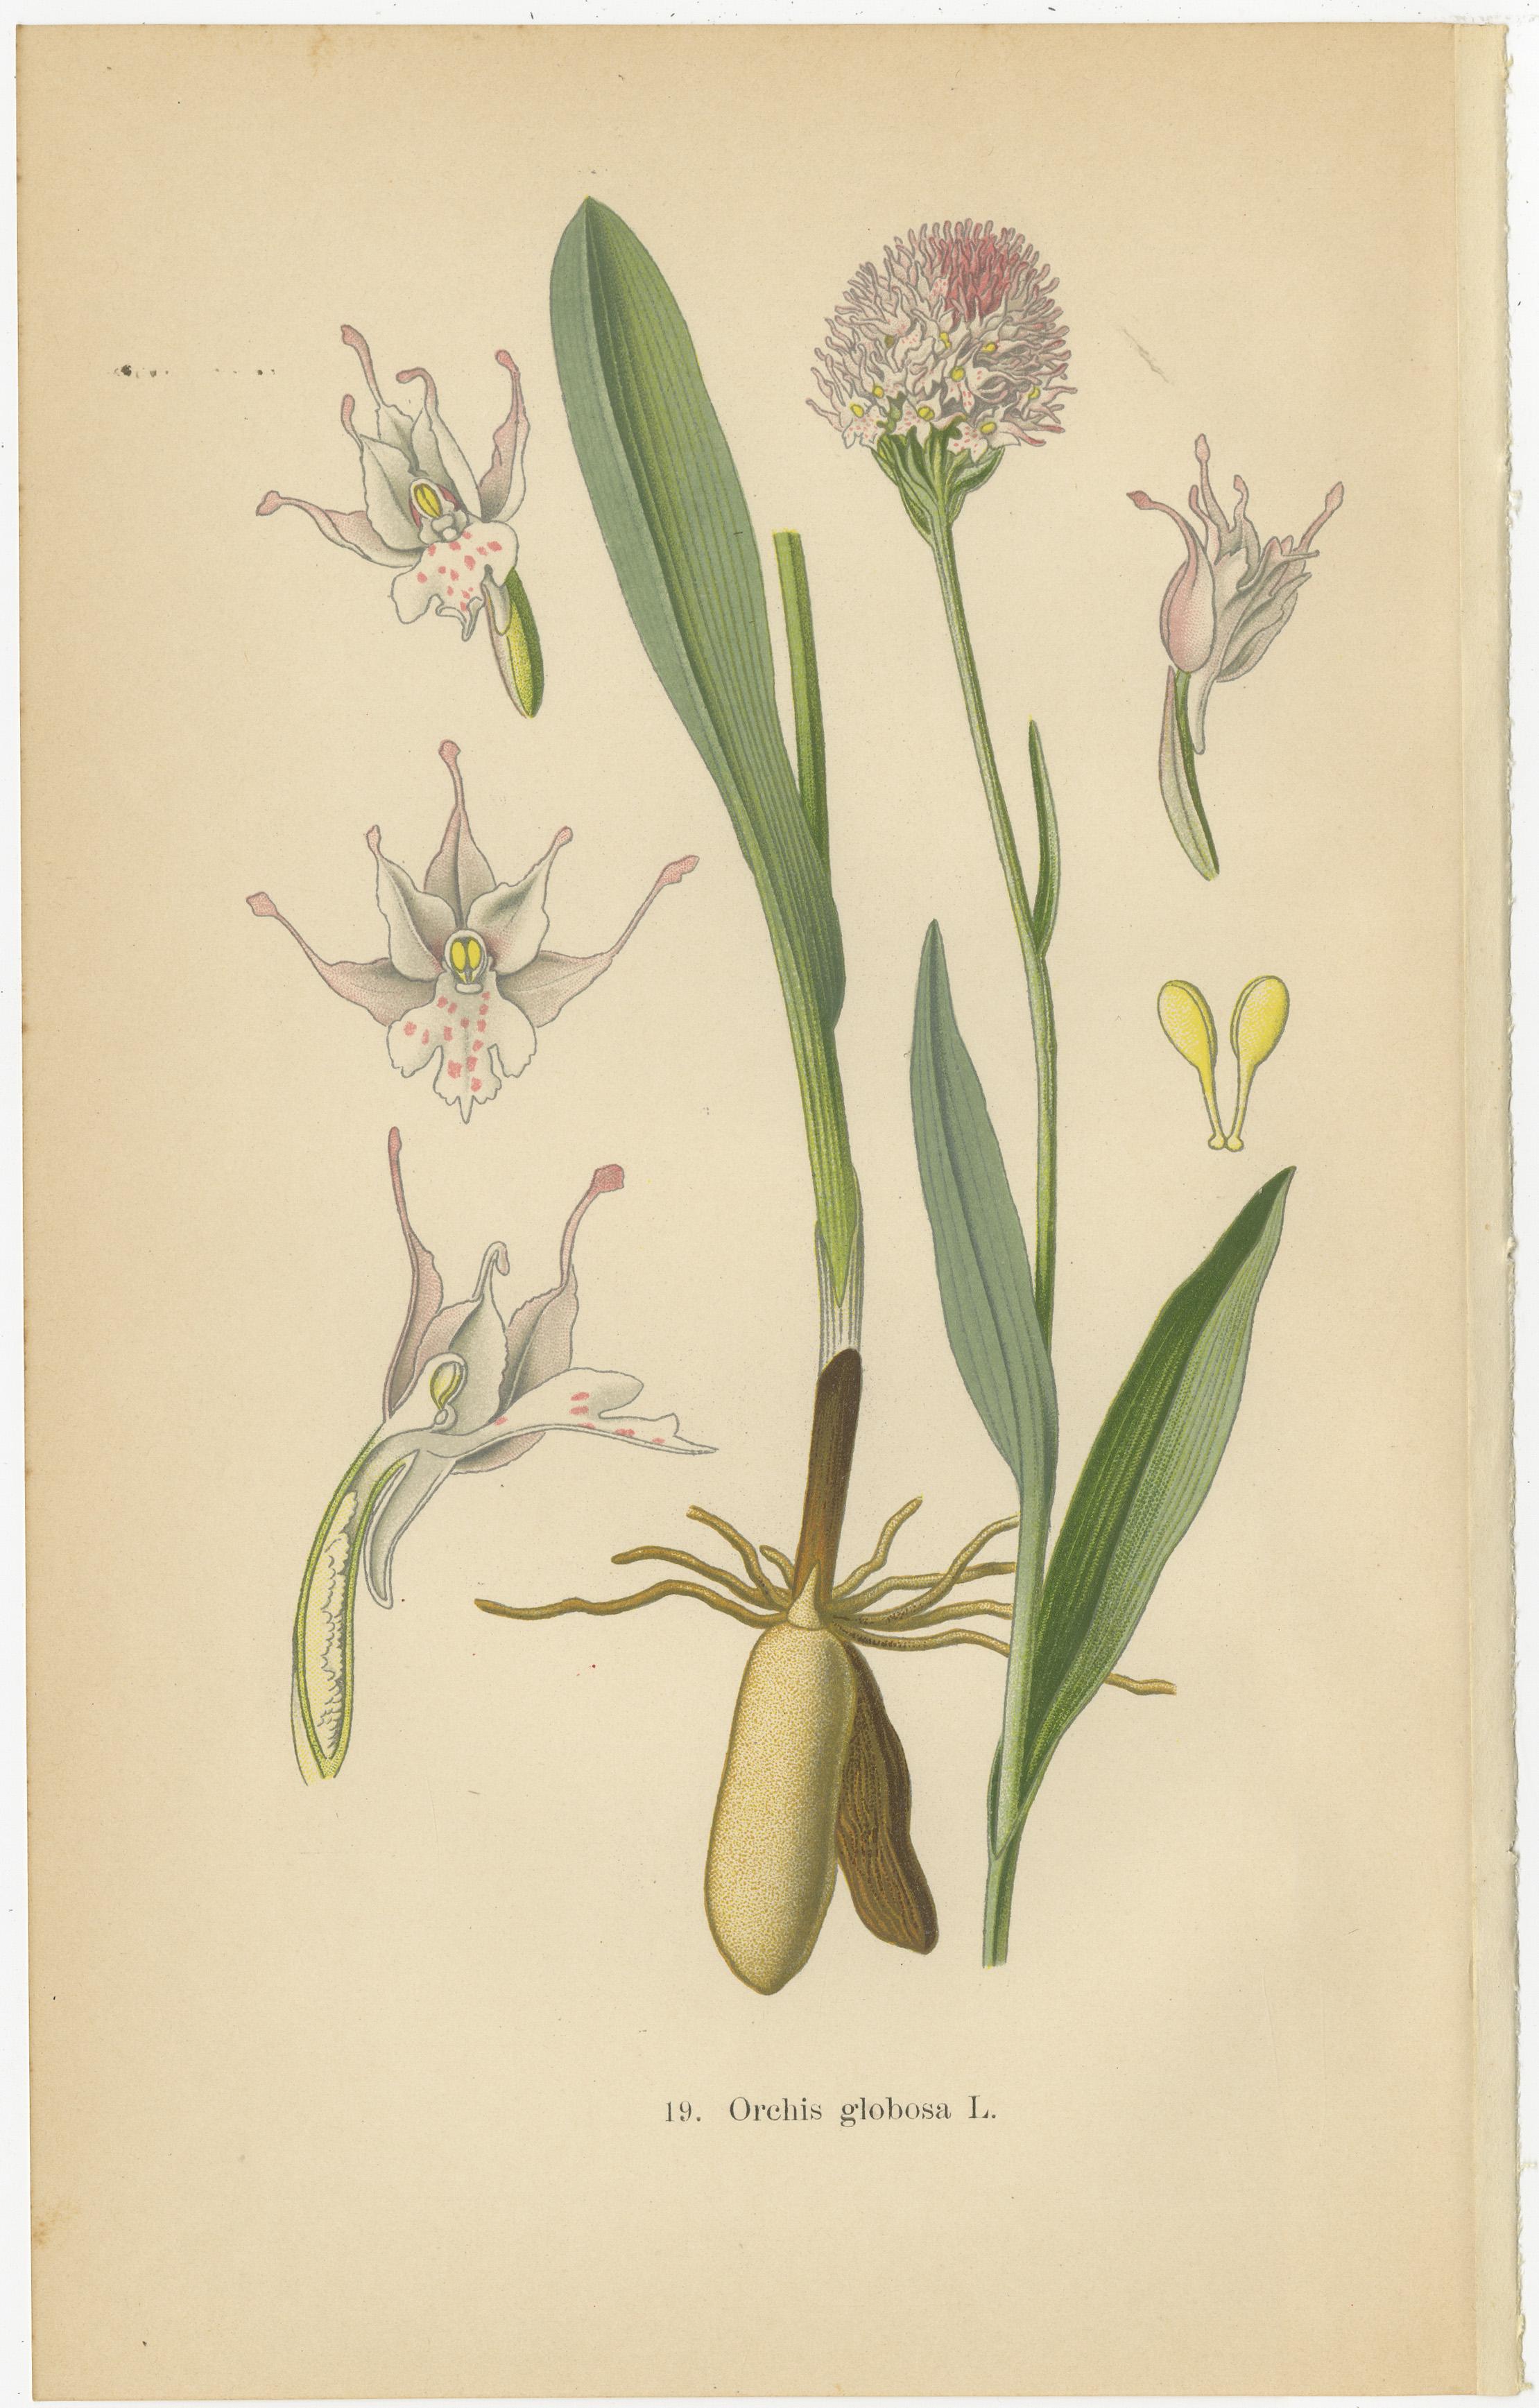 In this collage are two botanical illustrations from Walter Müller's esteemed 1904 work, detailing the orchid species of Germany and its environs. 

The first print showcases 